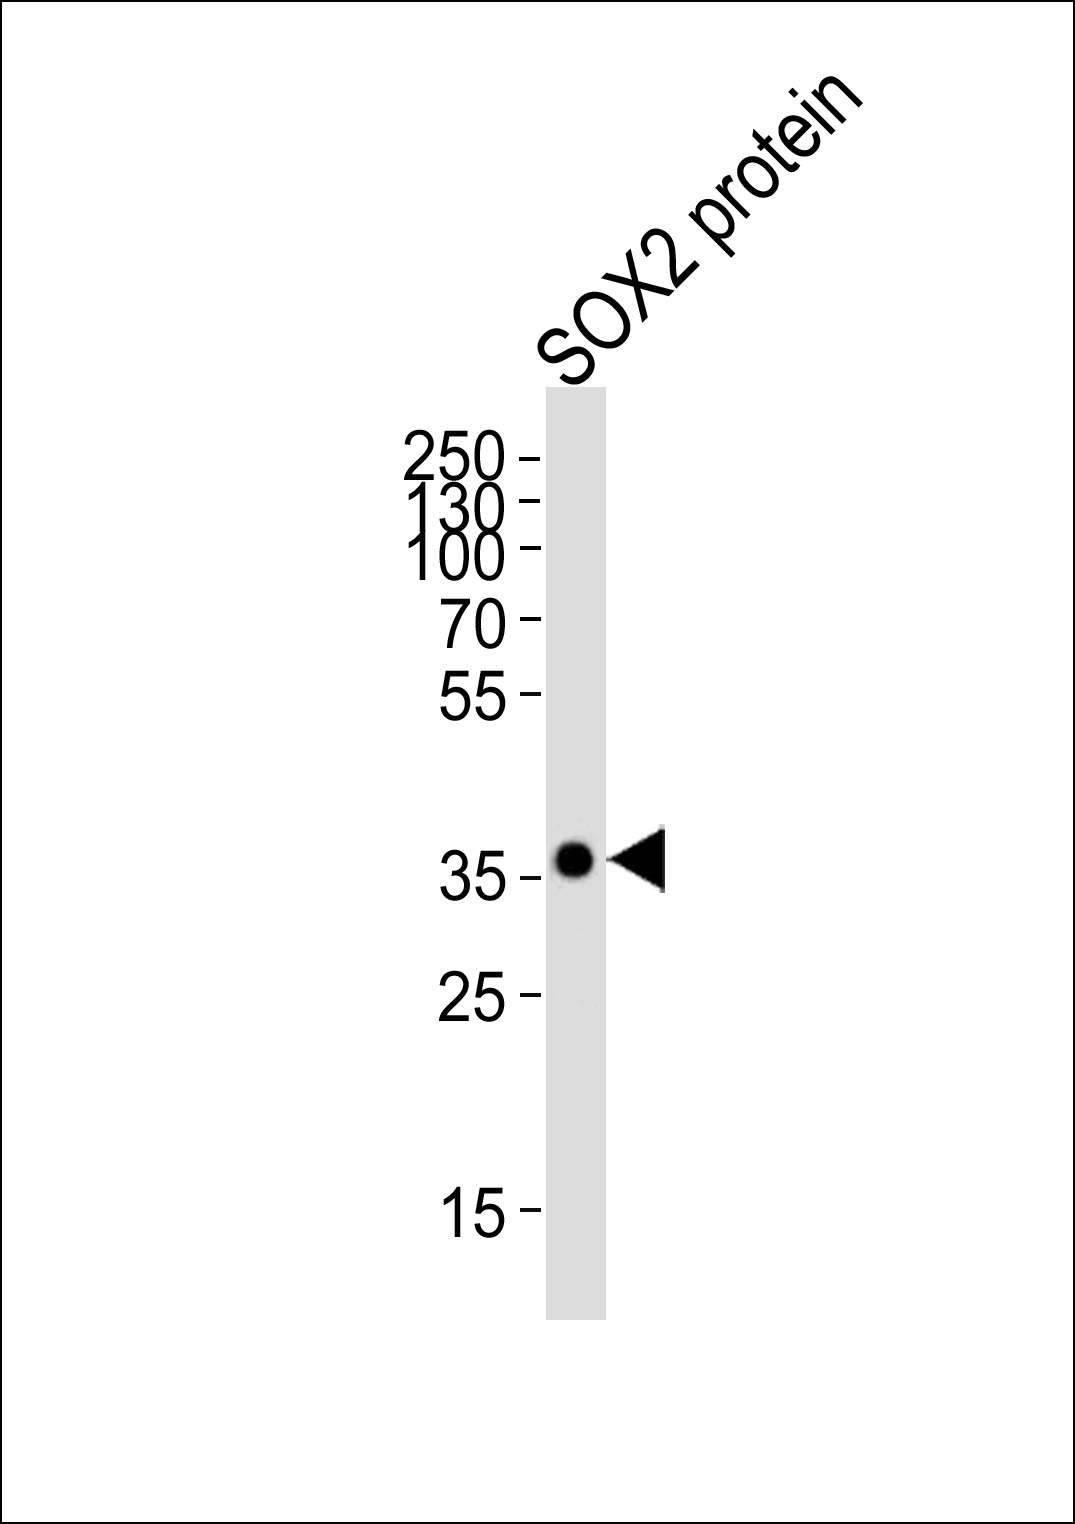 Lane 1: SOX2 Protein Isolate; probed with SOX2 (7C4) Monoclonal Antibody, unconjugated (bsm-51142M) at 1:4000 overnight at 4\u00b0C followed by a conjugated secondary antibody for 60 minutes at 37\u00b0C.